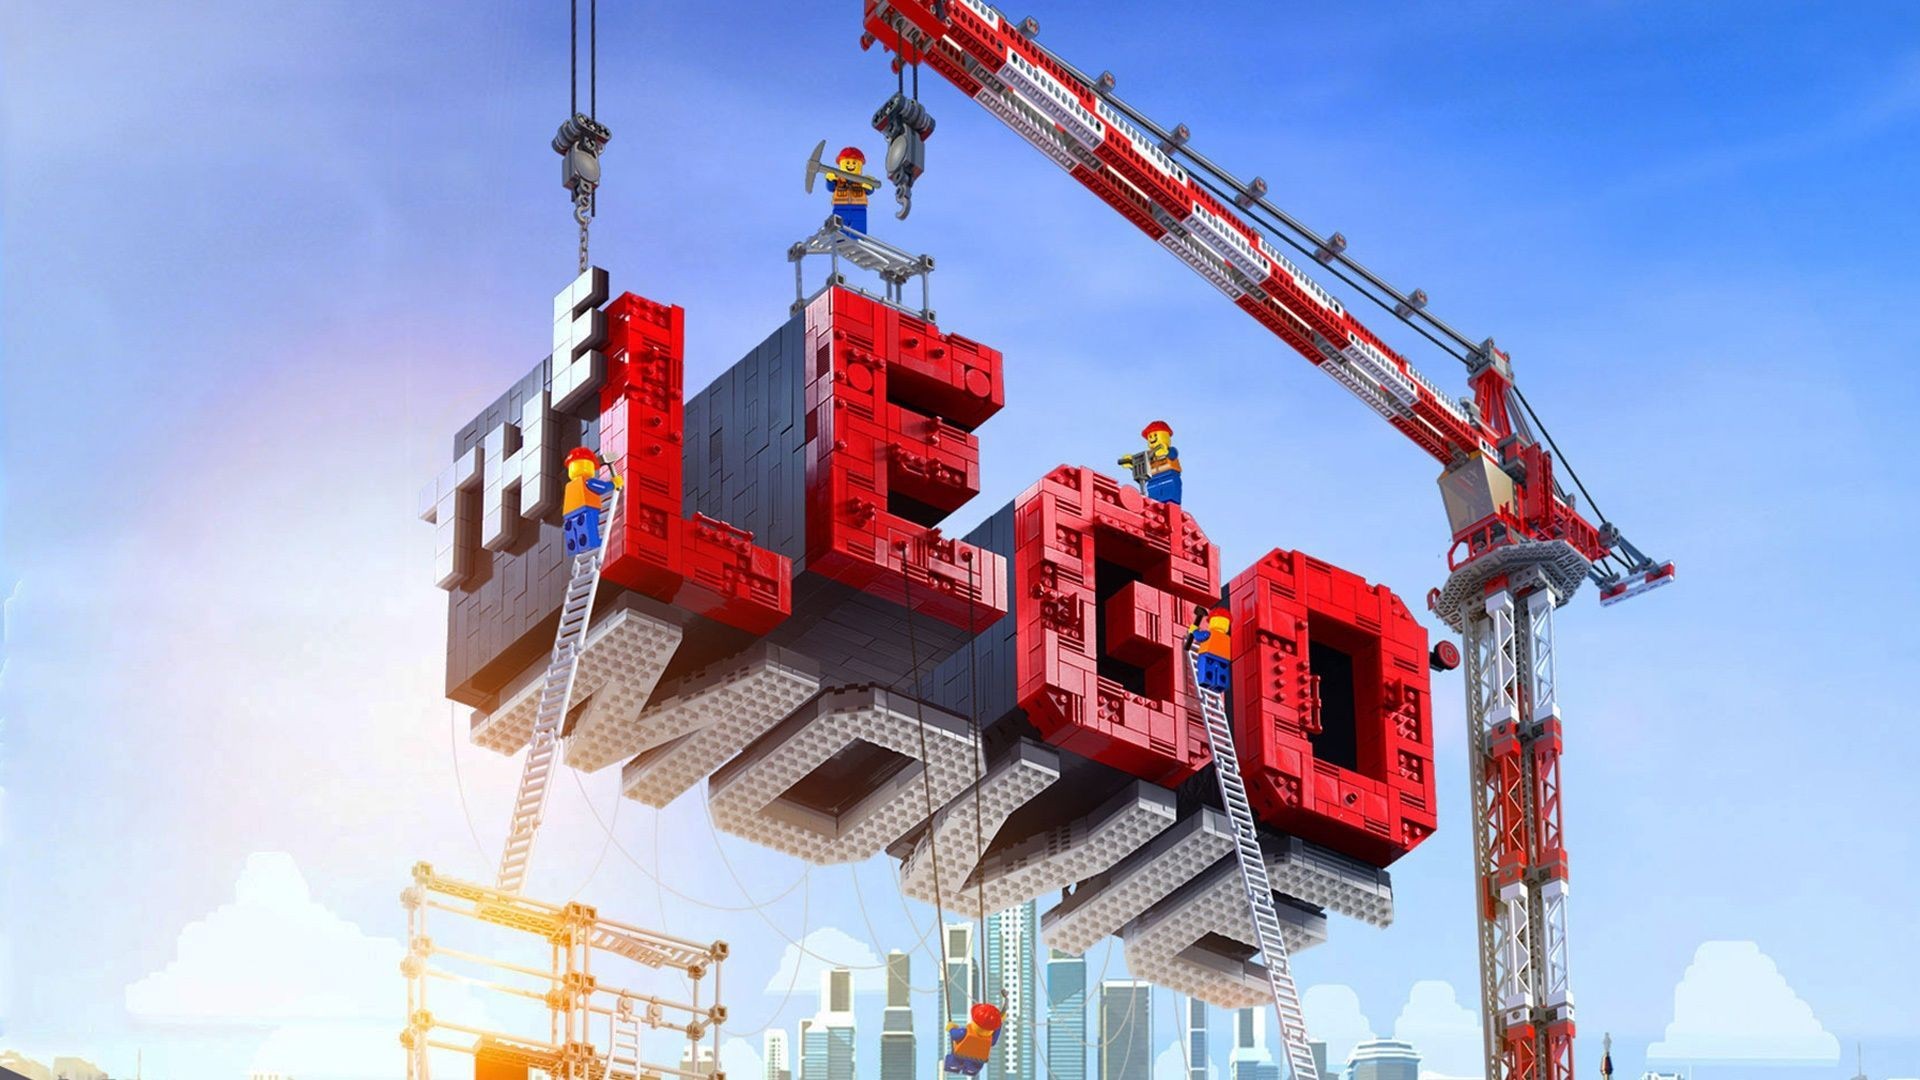 General 1920x1080 LEGO The Lego Movie cranes (machine) animated movies movies toys workers